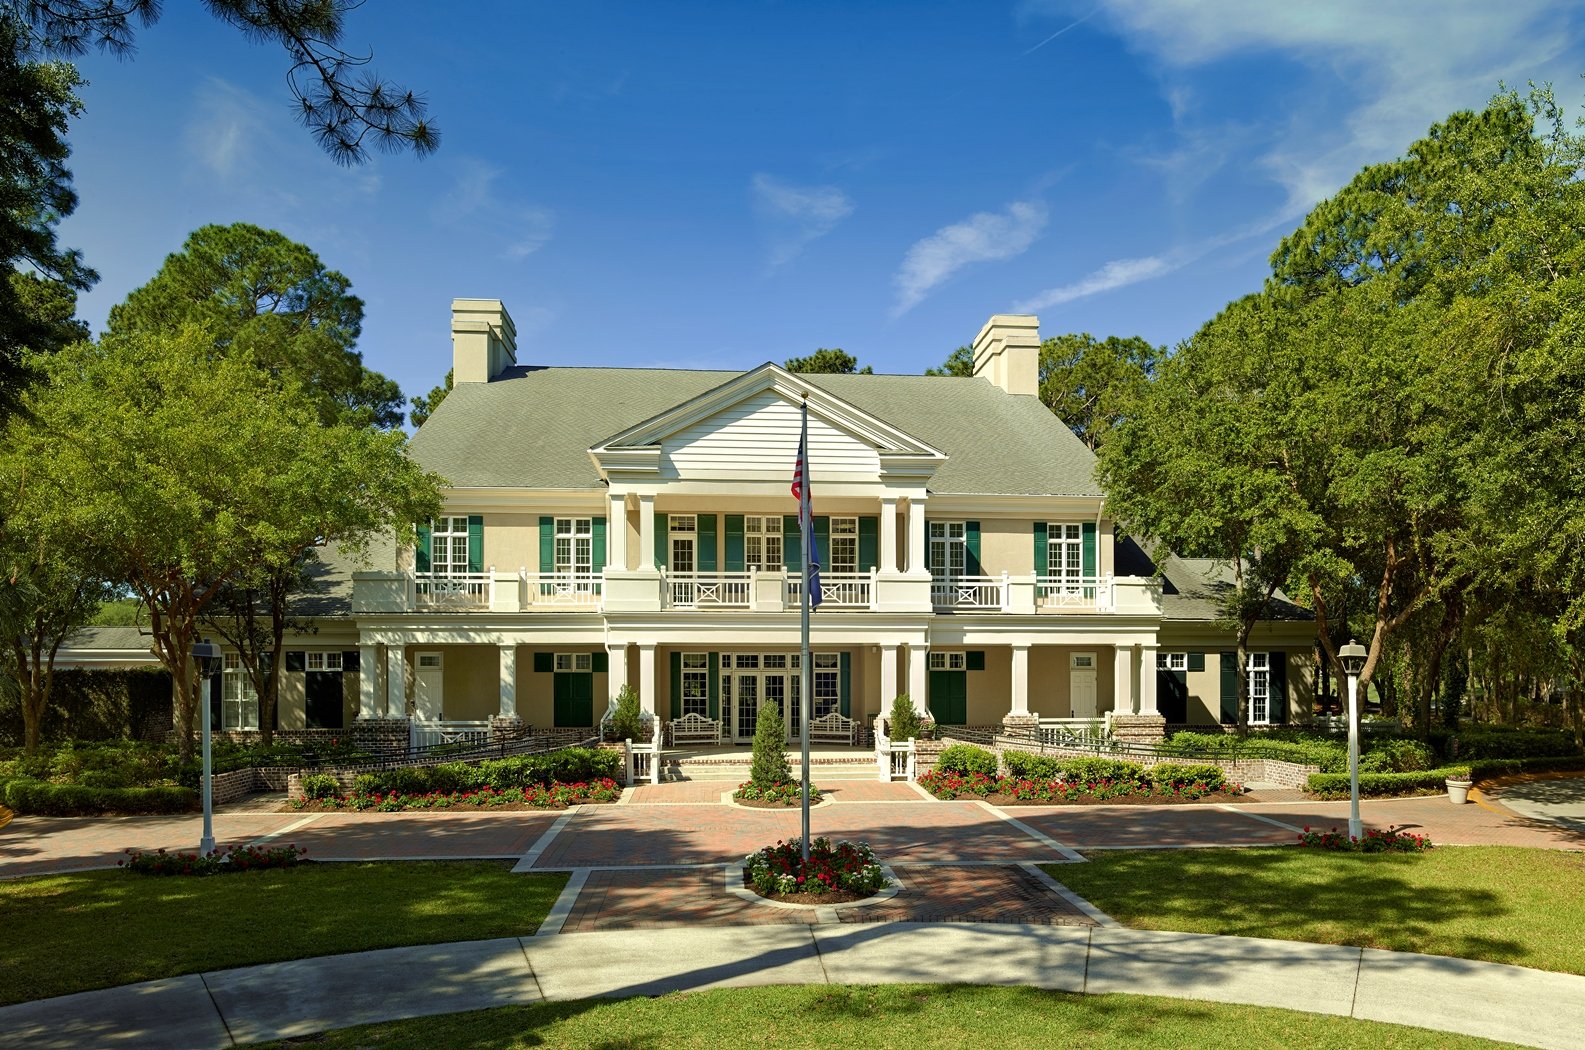 HHI Heritage Collection Palmetto Hall Clubhouse 04 2014 .jpg